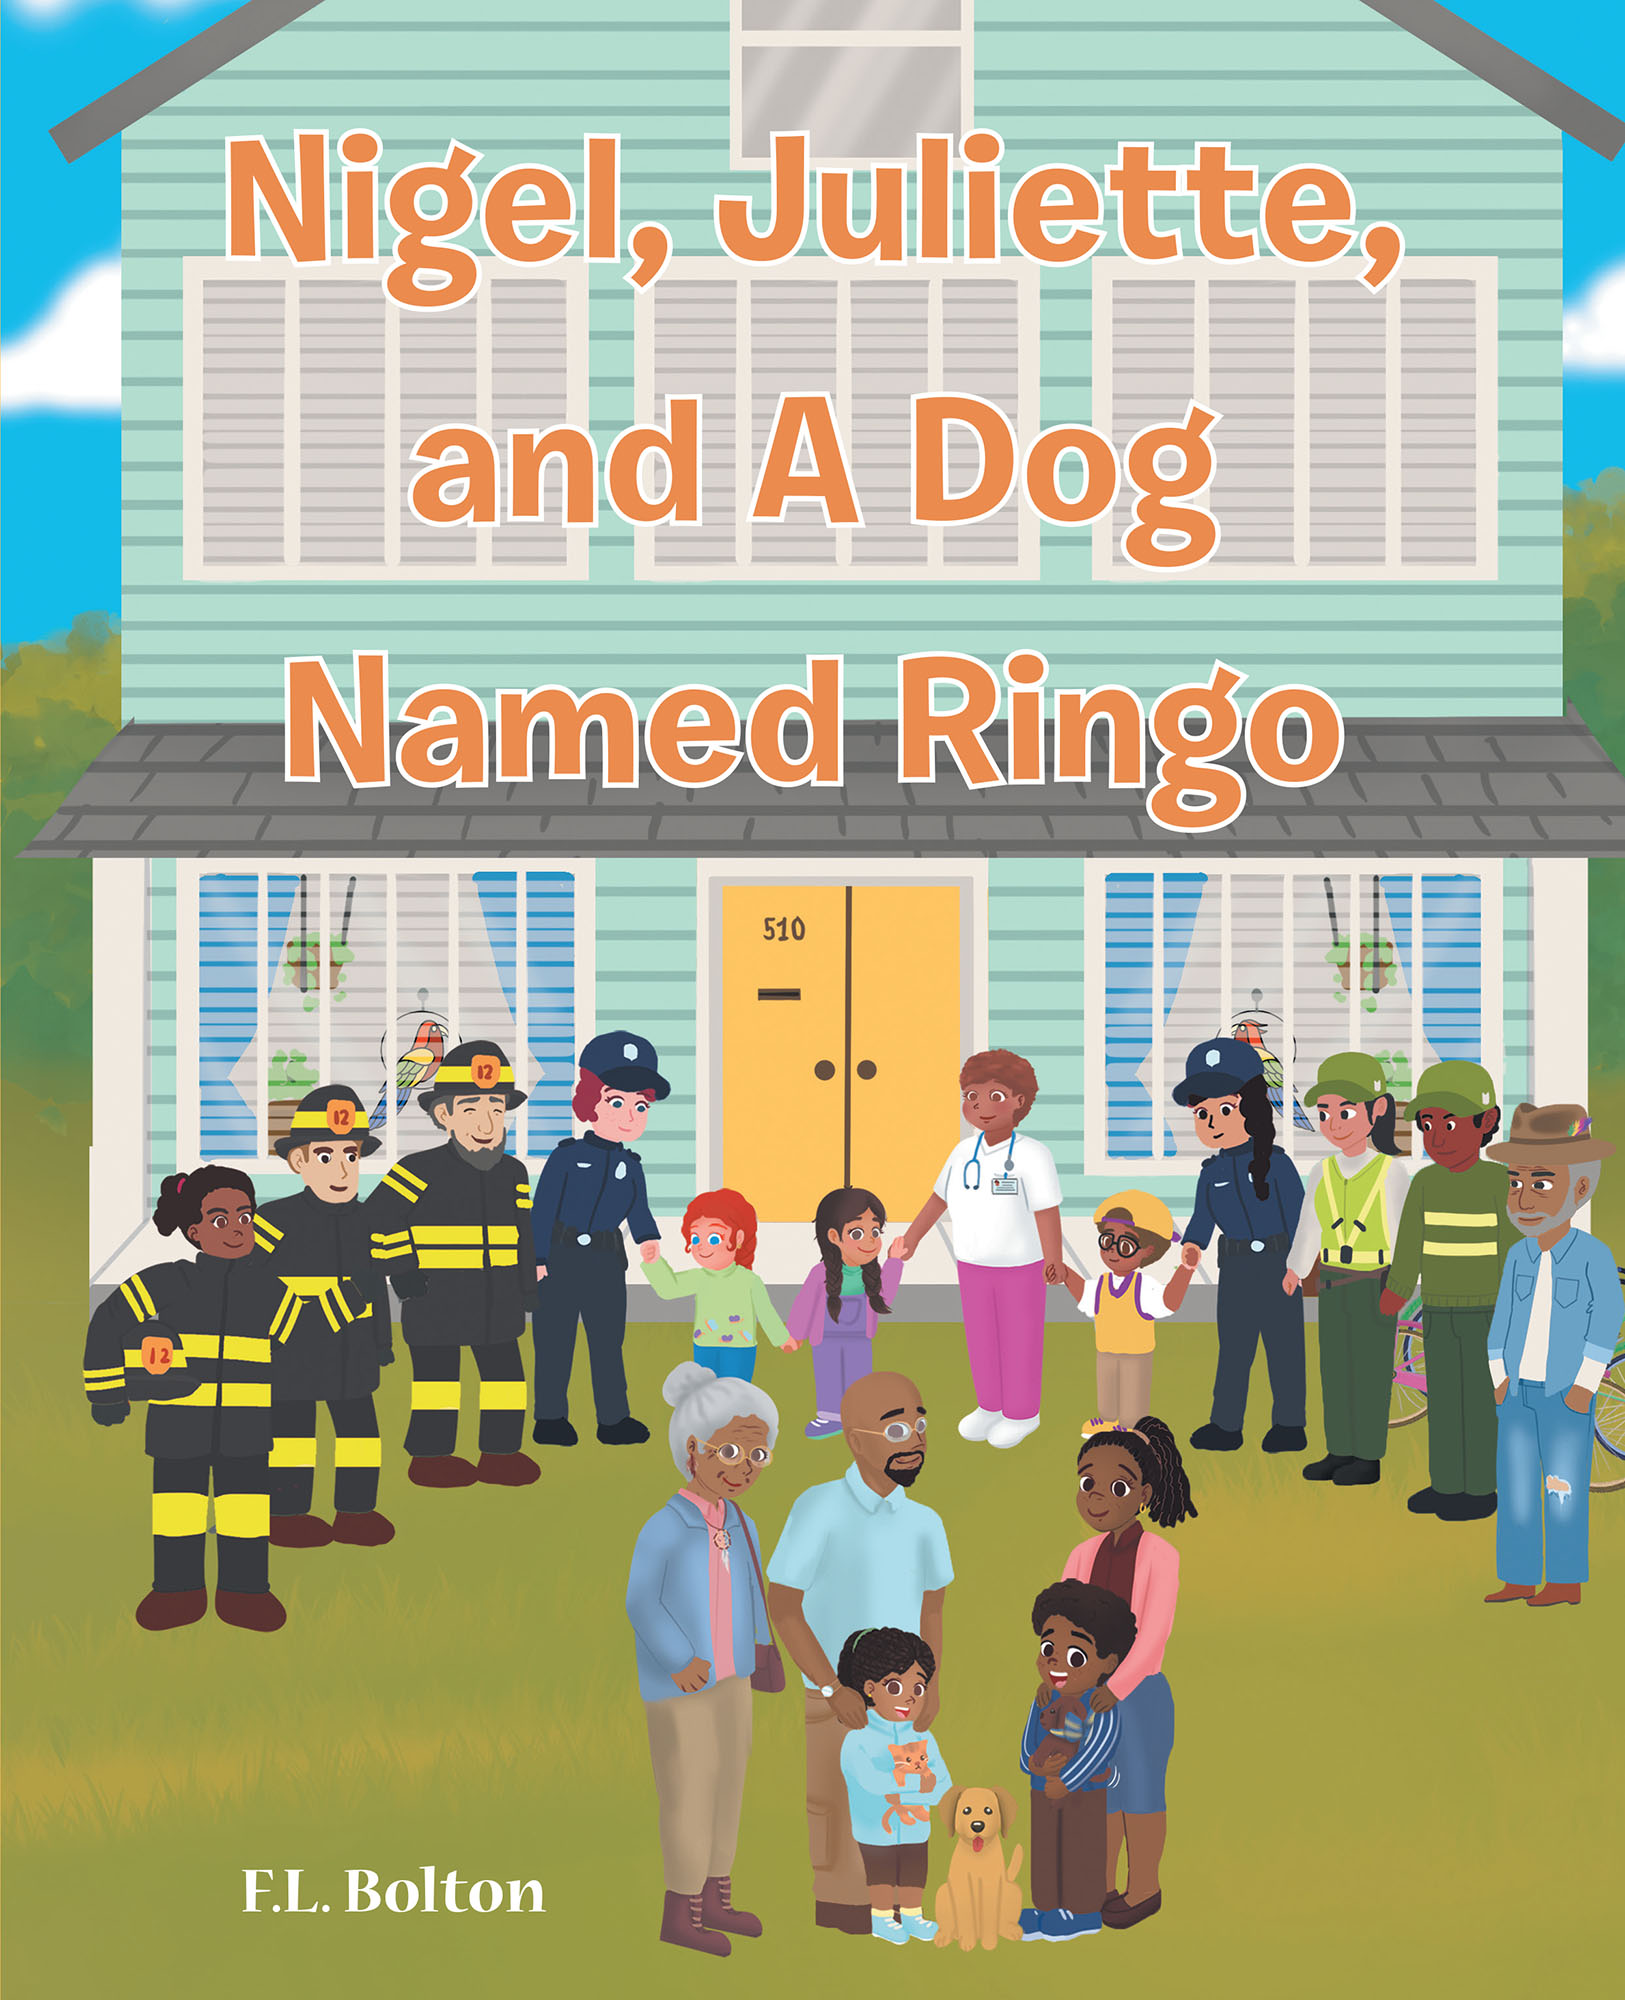 F.L. Bolton’s Newly Released “Nigel, Juliette, and a Dog Named Ringo” is a Touching Tale of Lessons of Faith and Life’s Stumbling Blocks